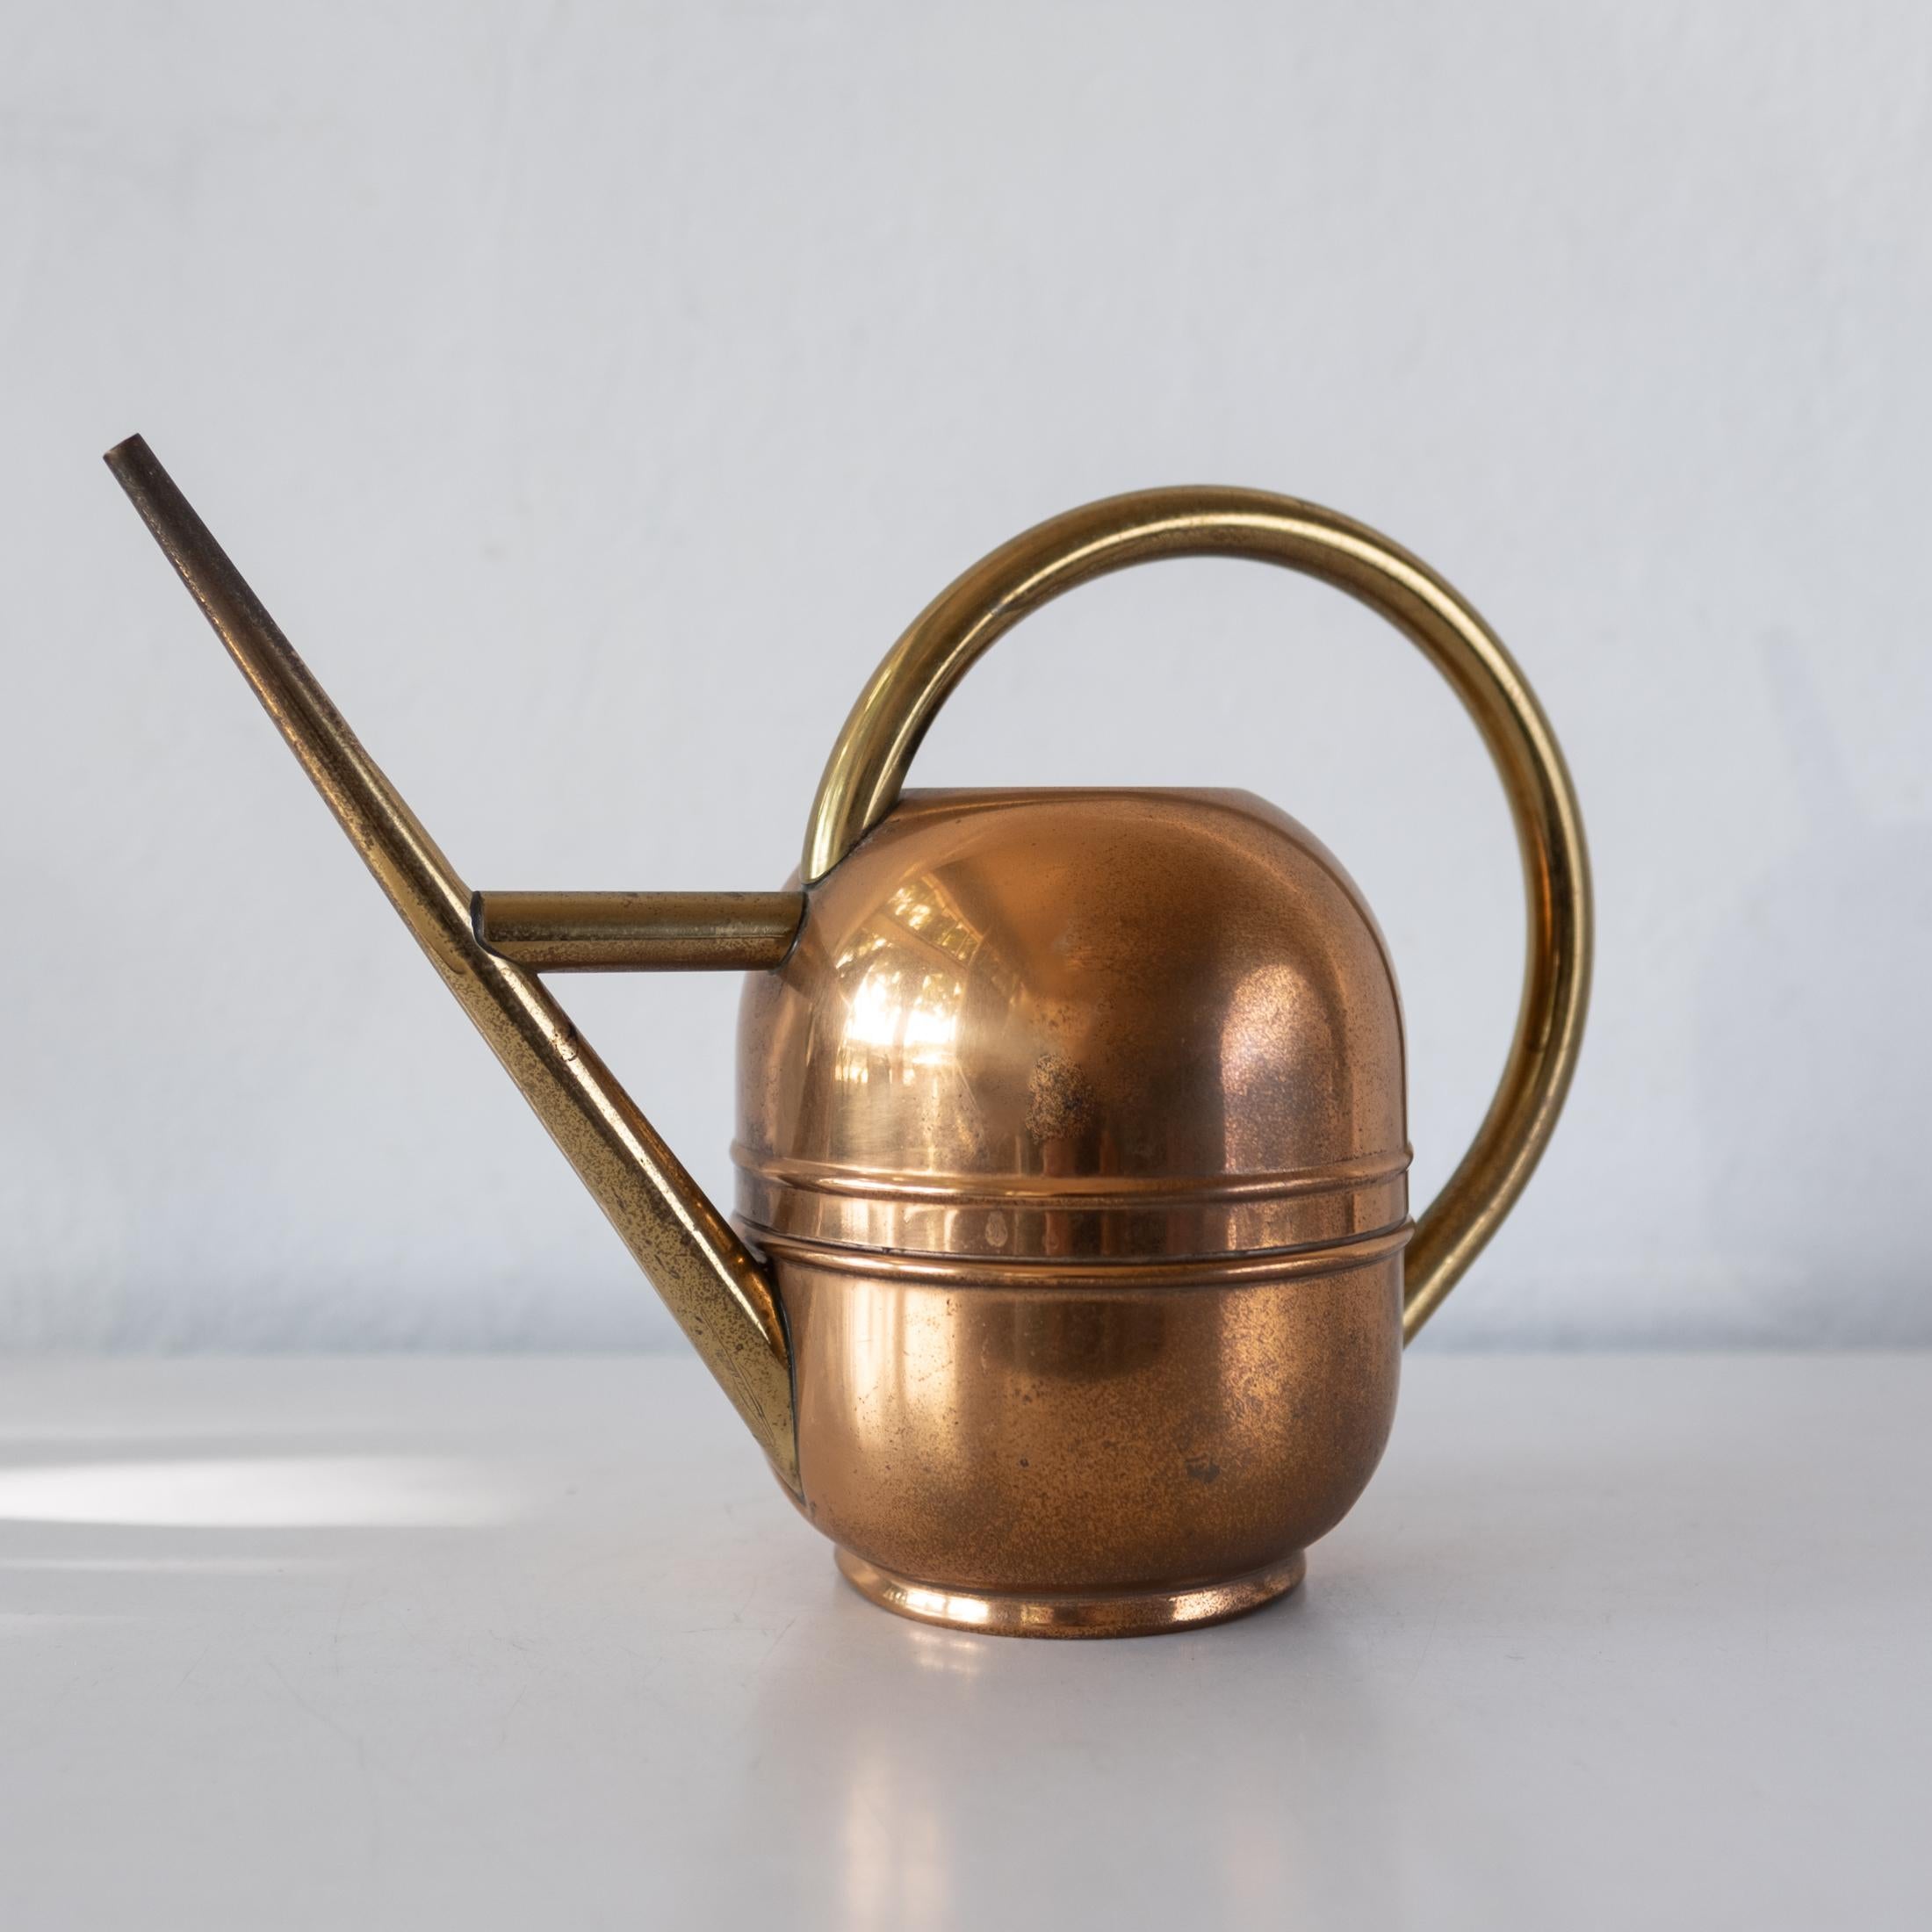 Art Deco copper and brass watering can. Manufactured by the Chase Brass and Copper Company in the 1930s. Chase Model No. 11173. Signed on the bottom with the Chase Centaur logo. Water tight. USA, 1930s. 